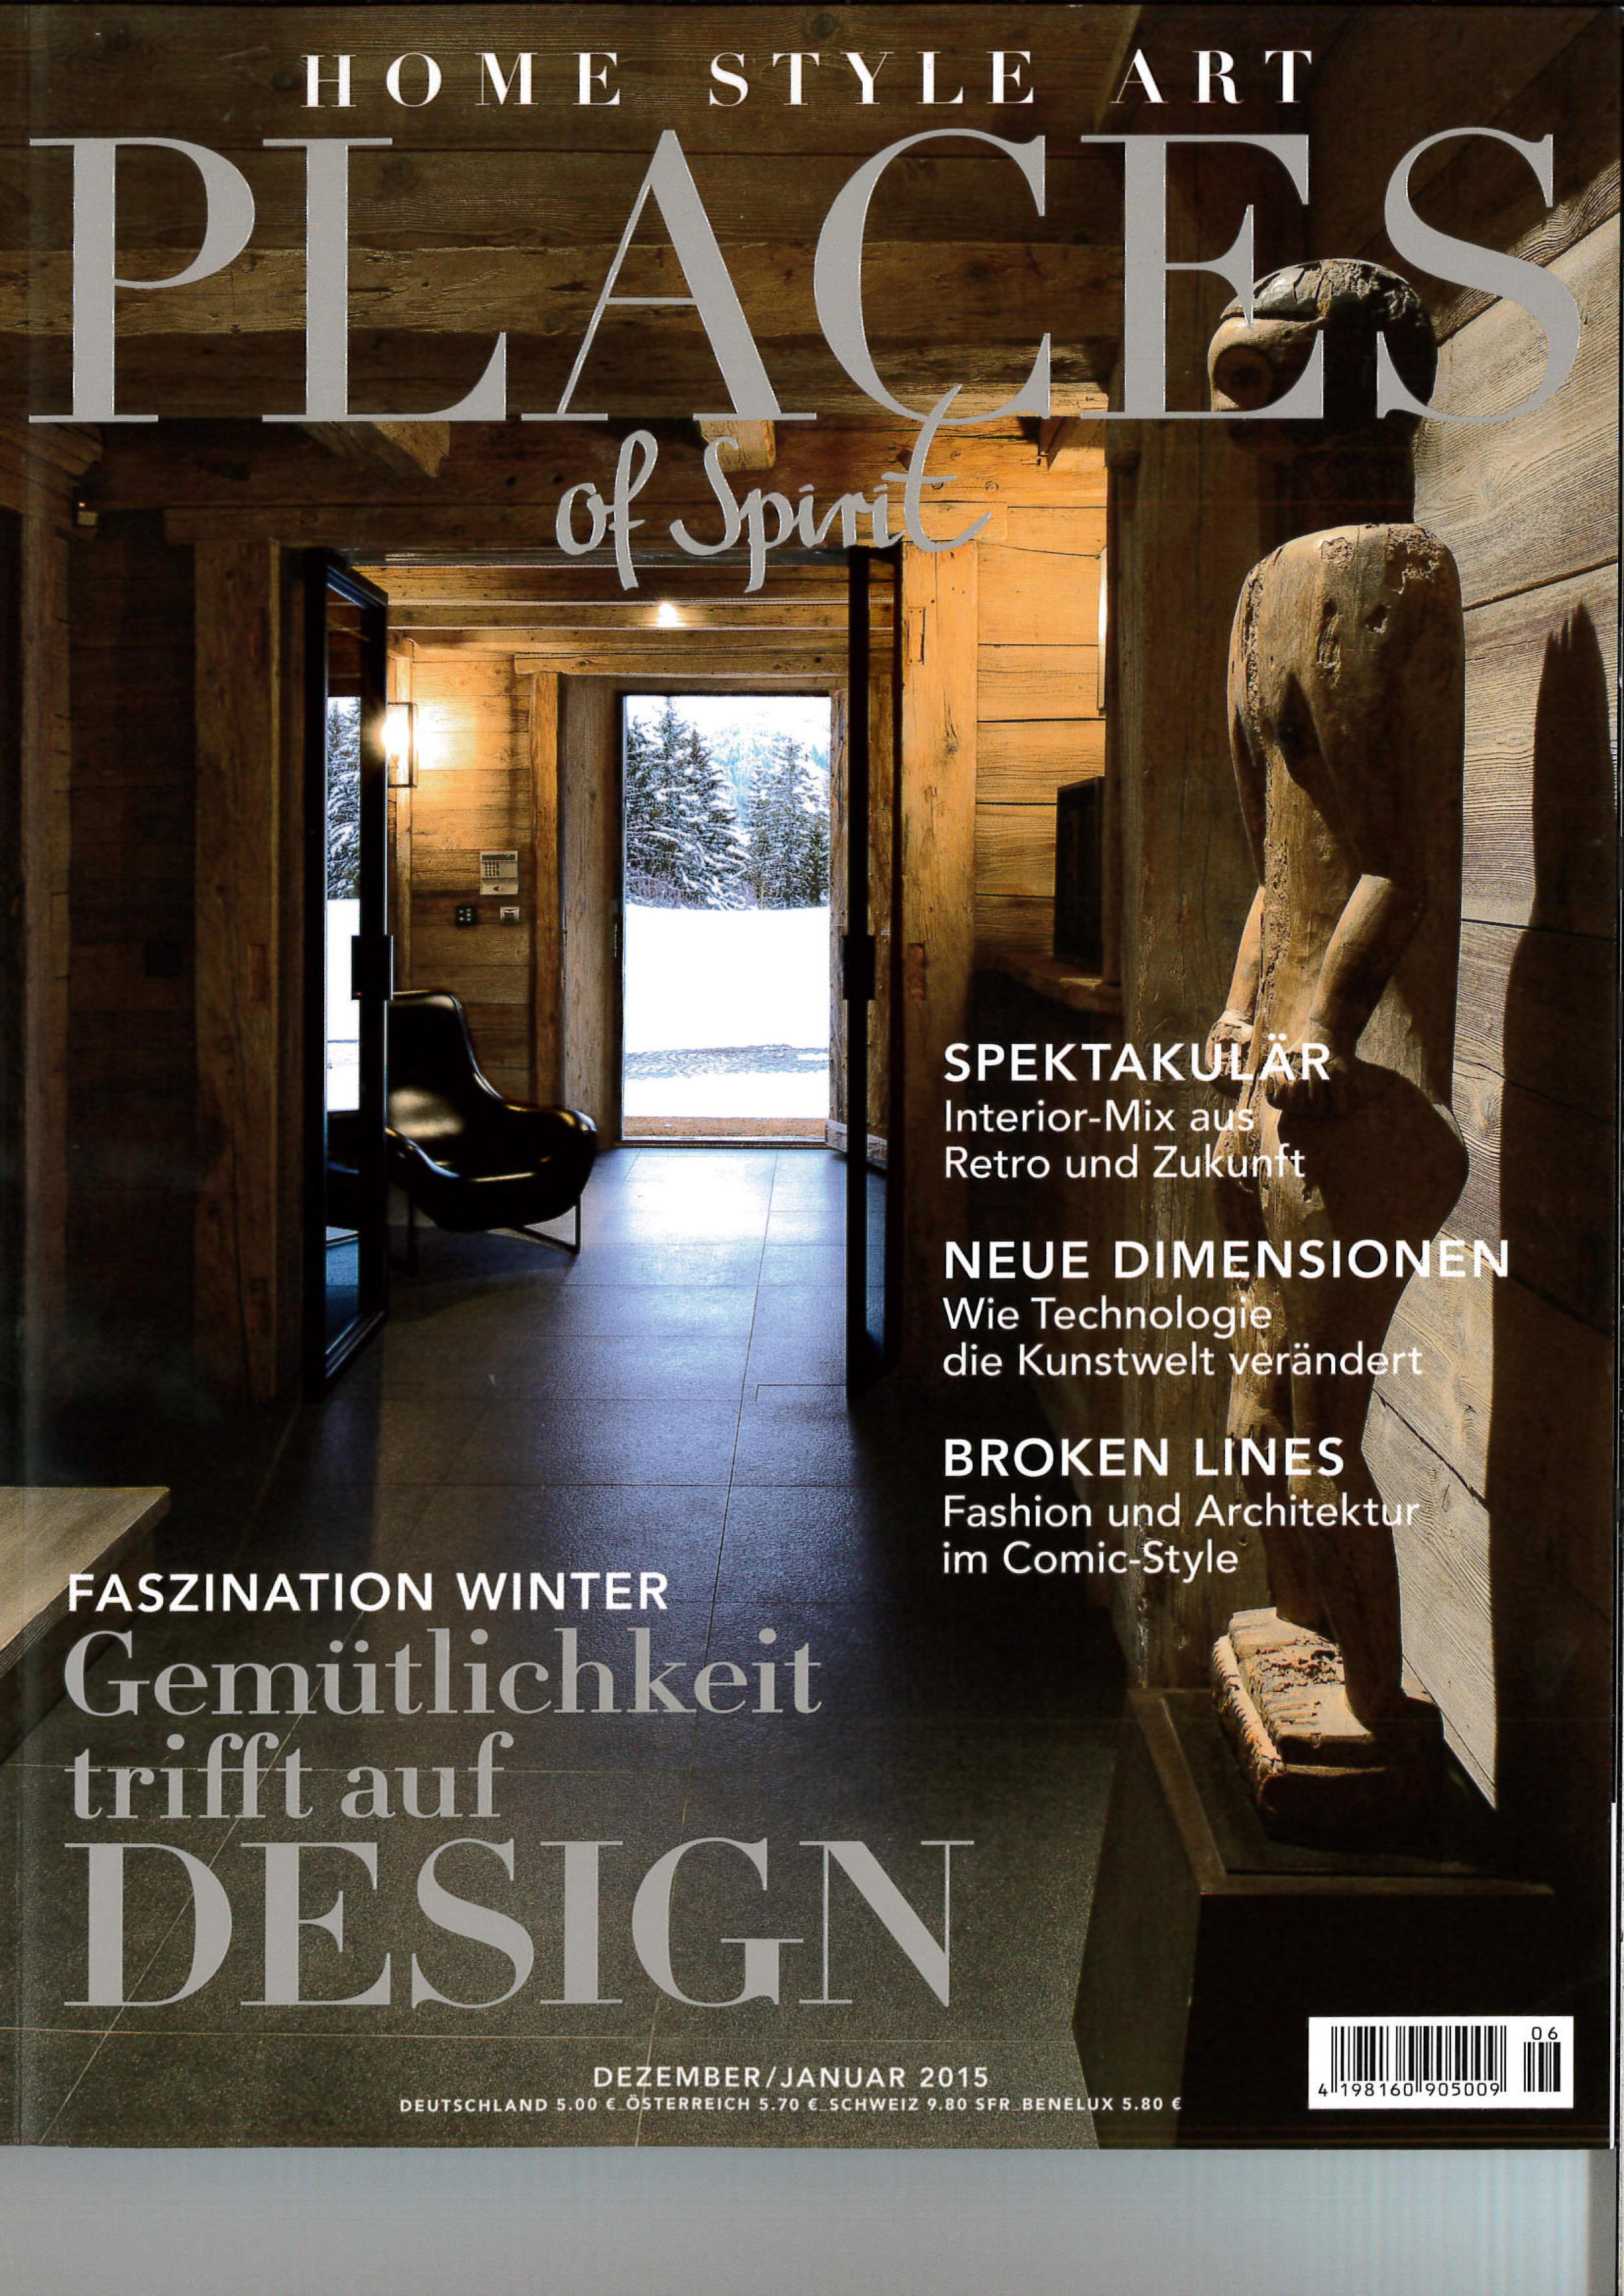 Places of Spirit Germany December 2014